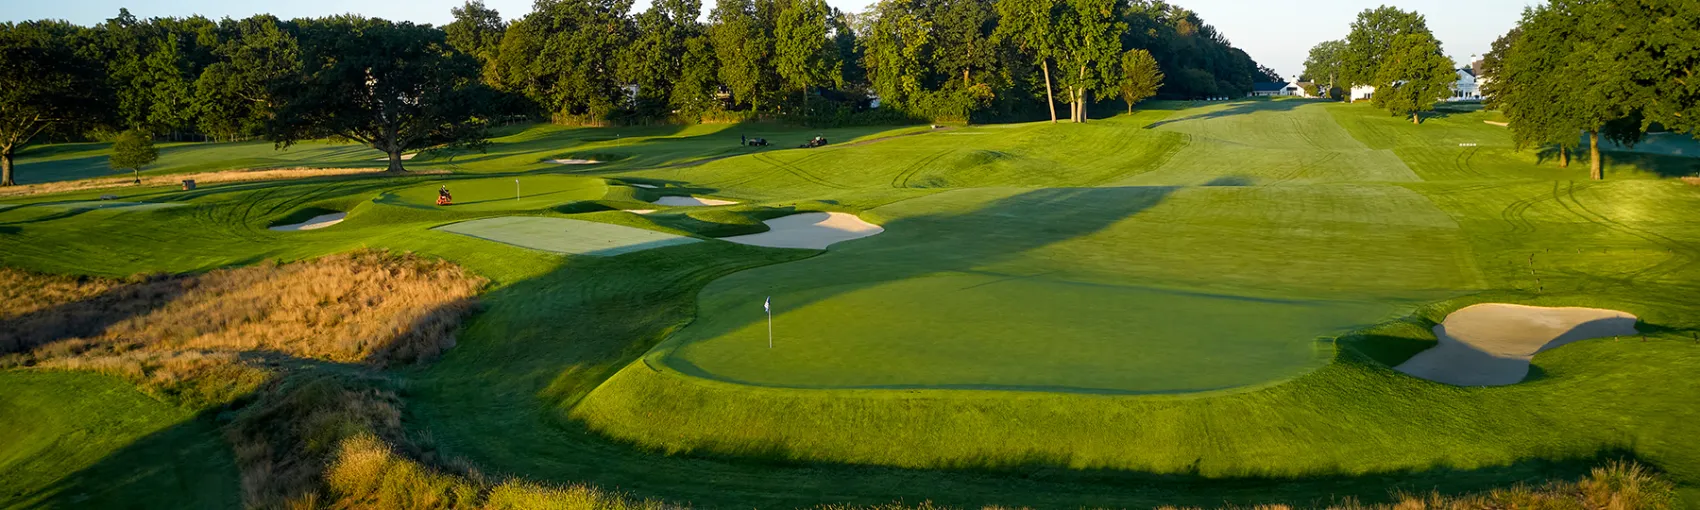 PREVIEW: 104th Open Championship presented by Donnelly Industries at Plainfield Country Club